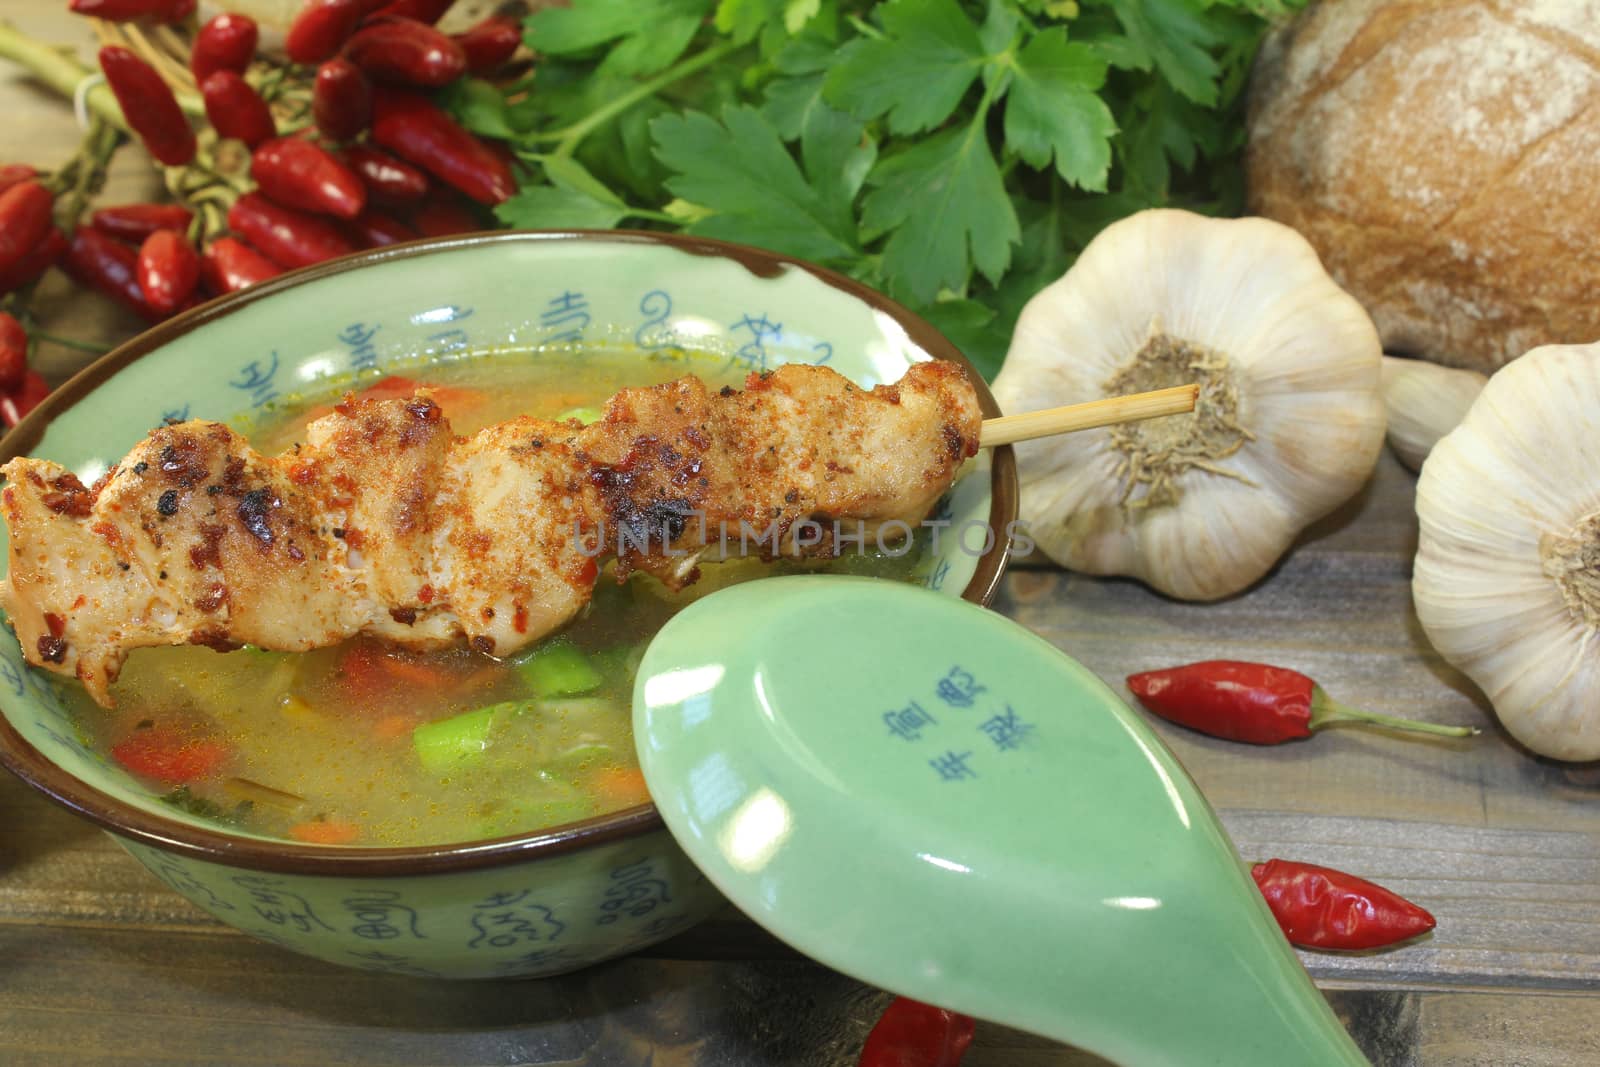 Poultry consomme with chicken skewers, vegetable and smooth parsley